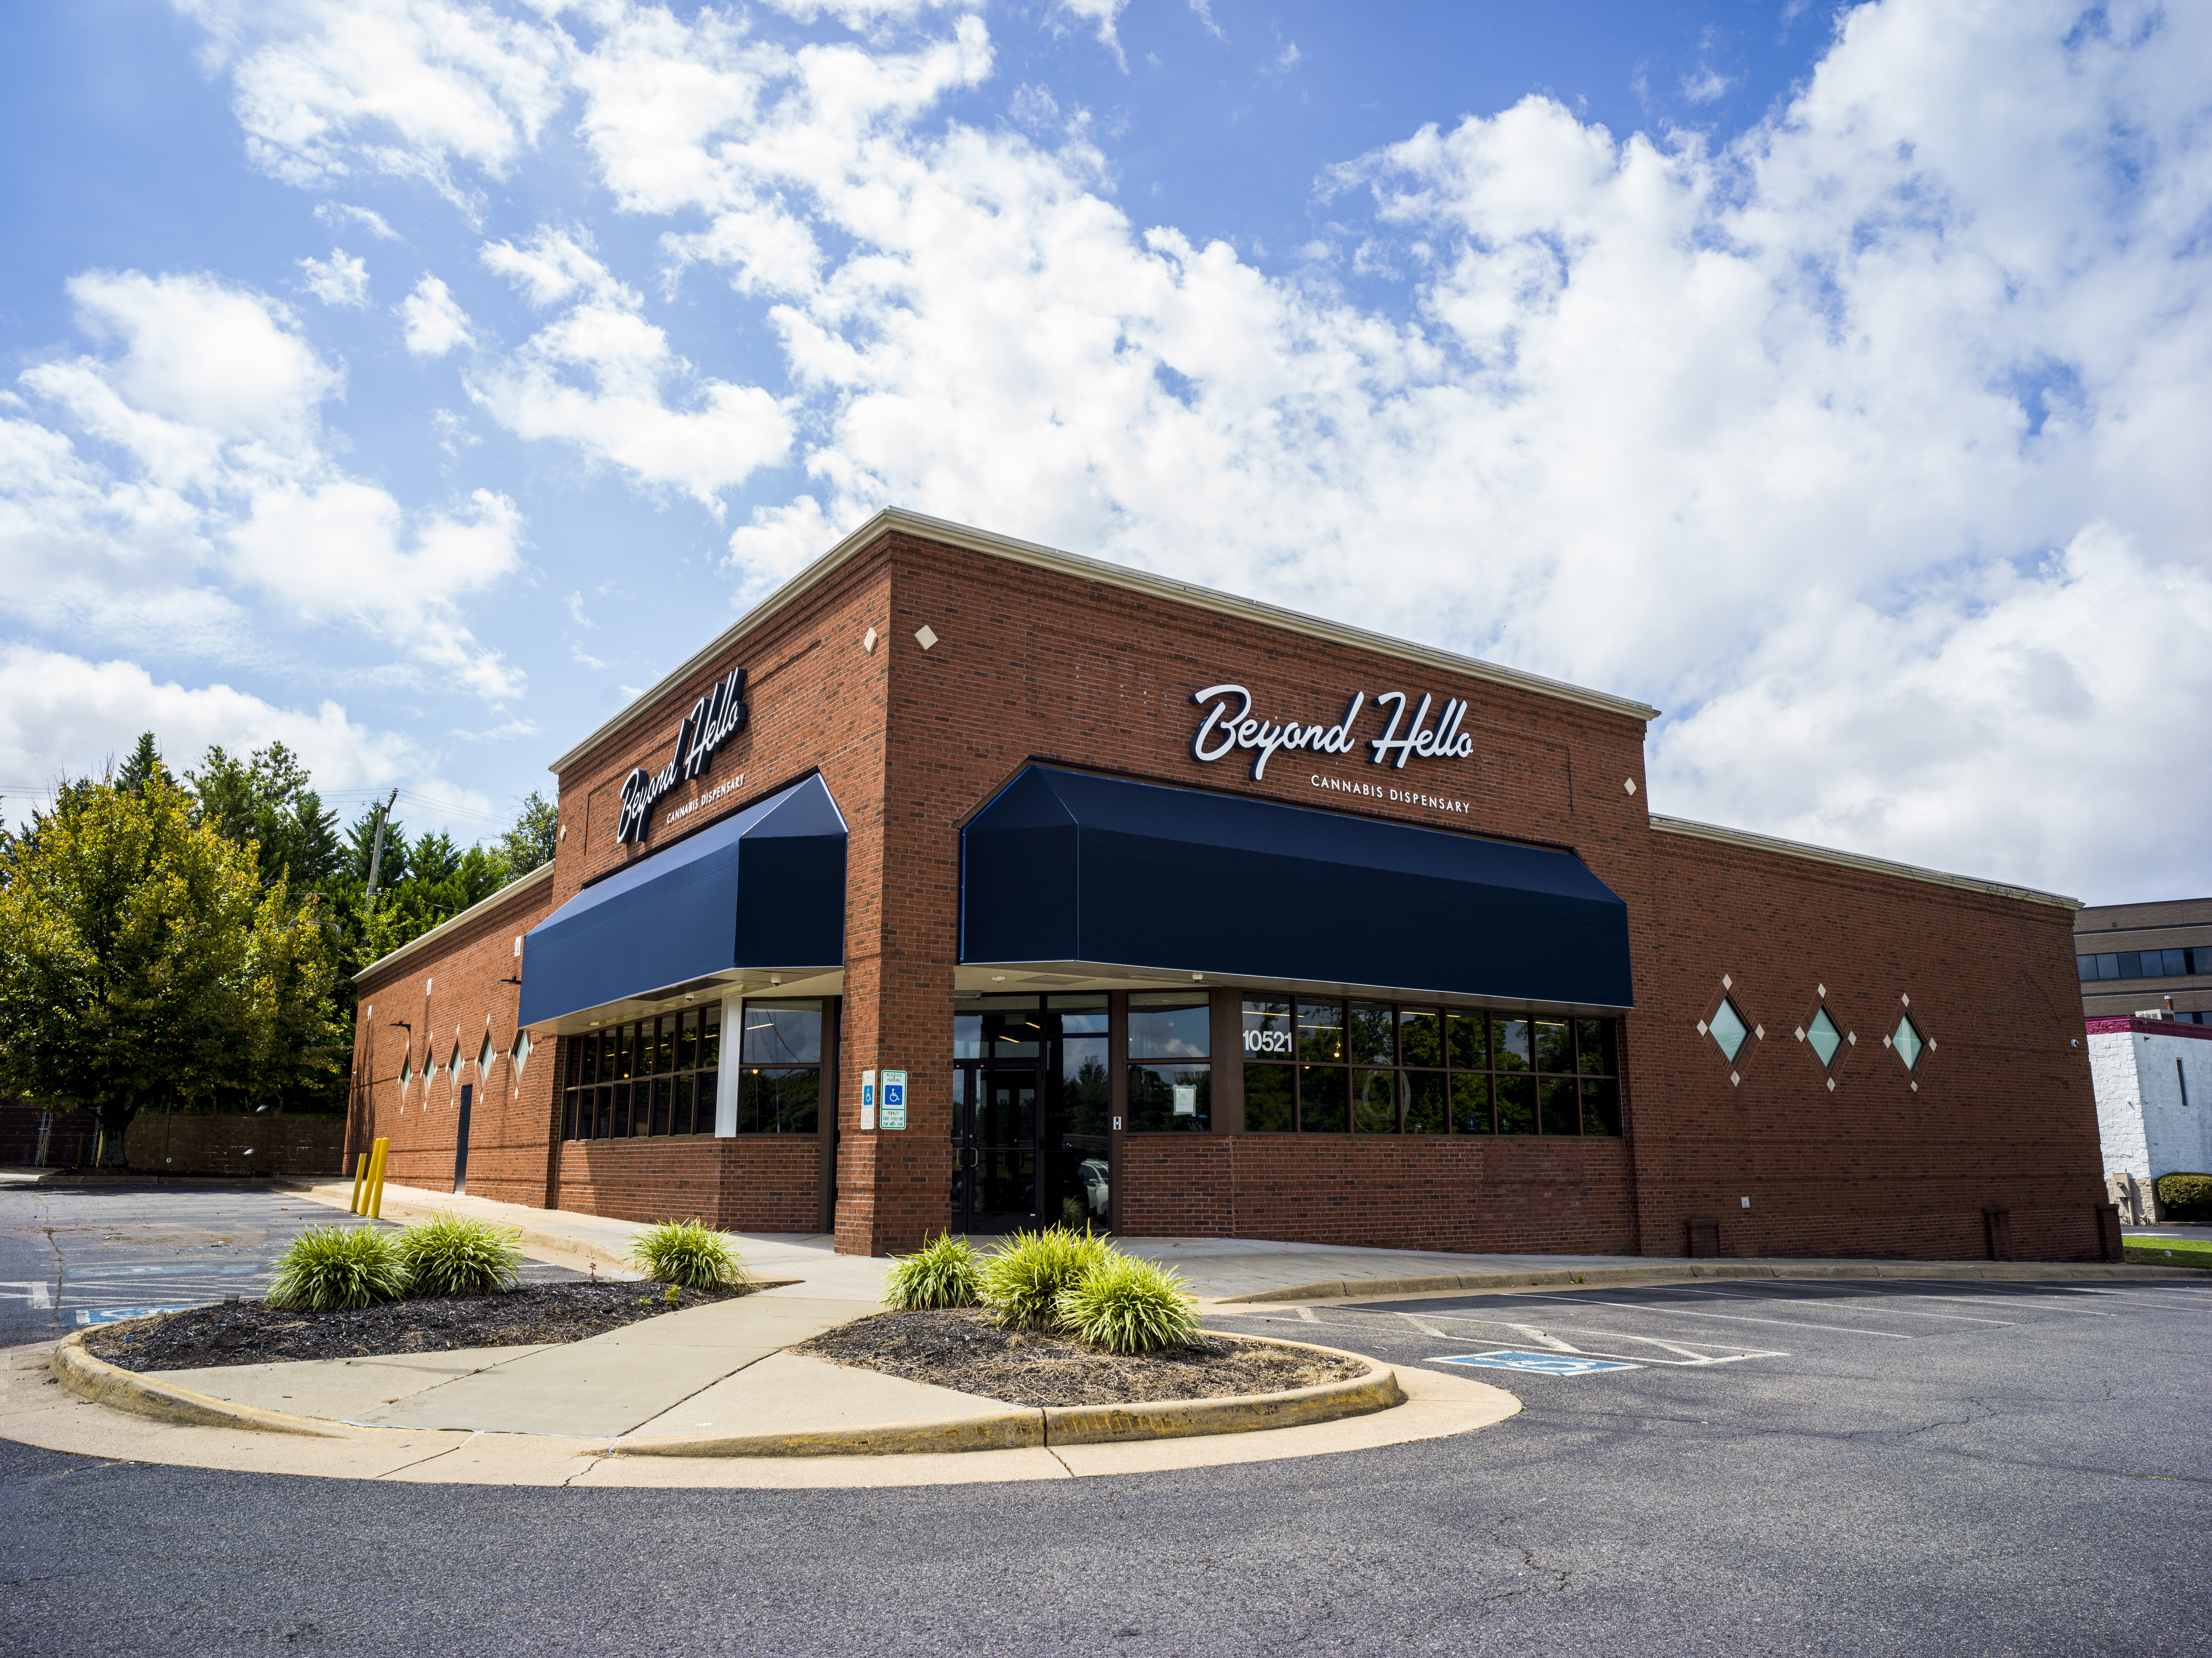 Jushi Holdings Inc. announced the opening of its fourth medical cannabis dispensary in Virginia and 35th retail location nationwide. Beyond Hello™ Fairfax will begin serving medical cannabis patients and registered agents on Wednesday, August 31st at 10:00 a.m. in-store and through its digital retail experience at beyond-hello.com